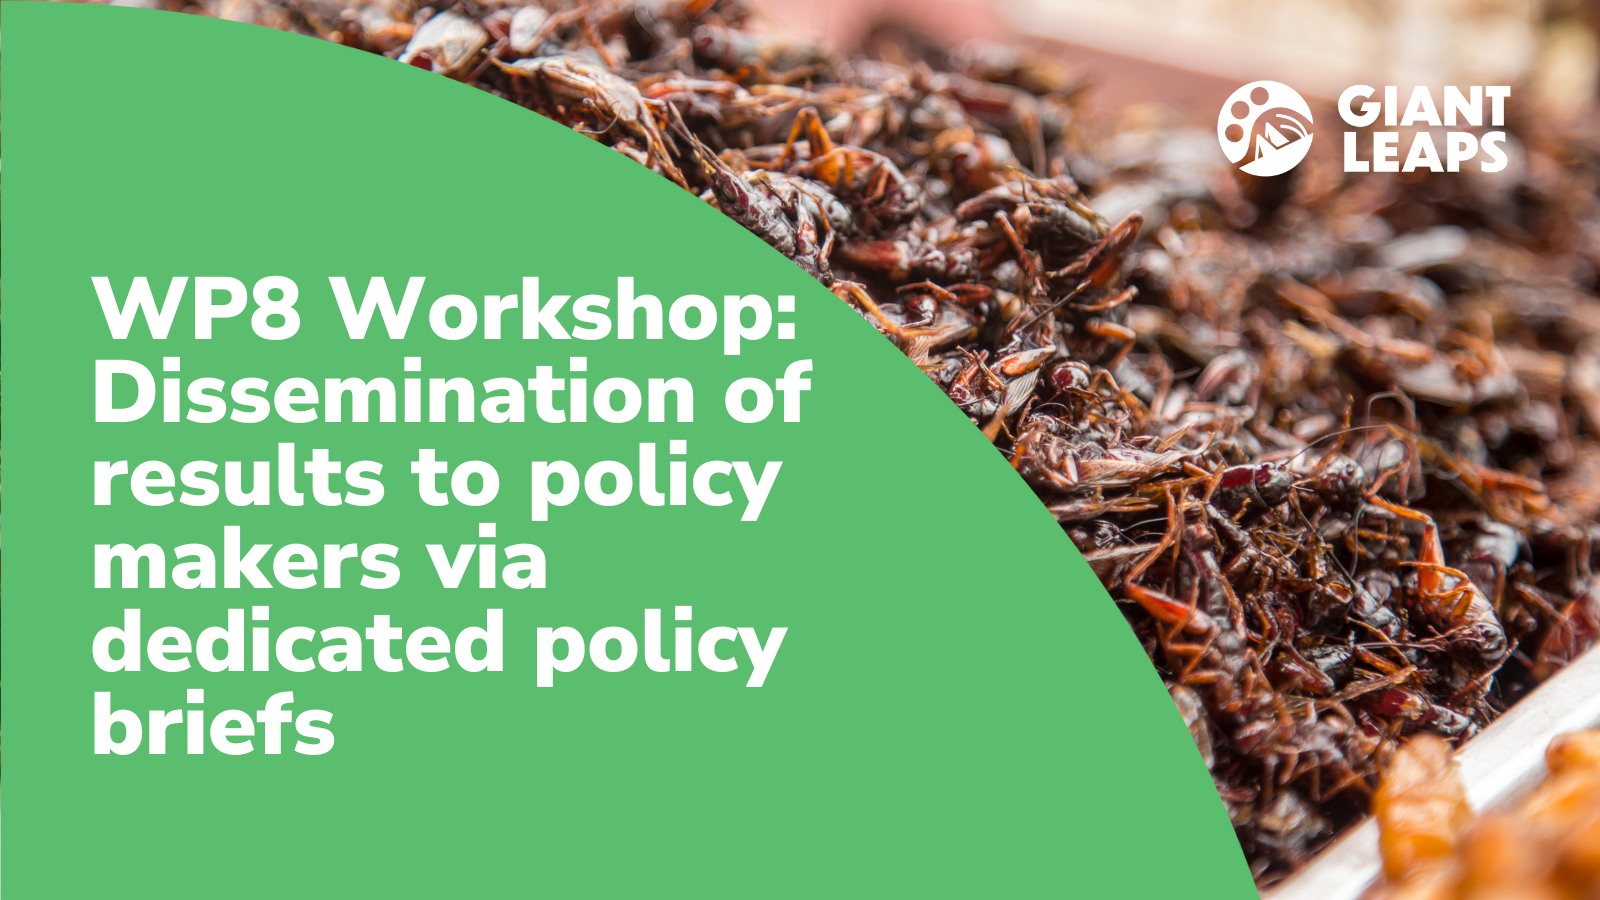 WP8.3 Workshop: Dissemination of results to policy makers via dedicated policy briefs